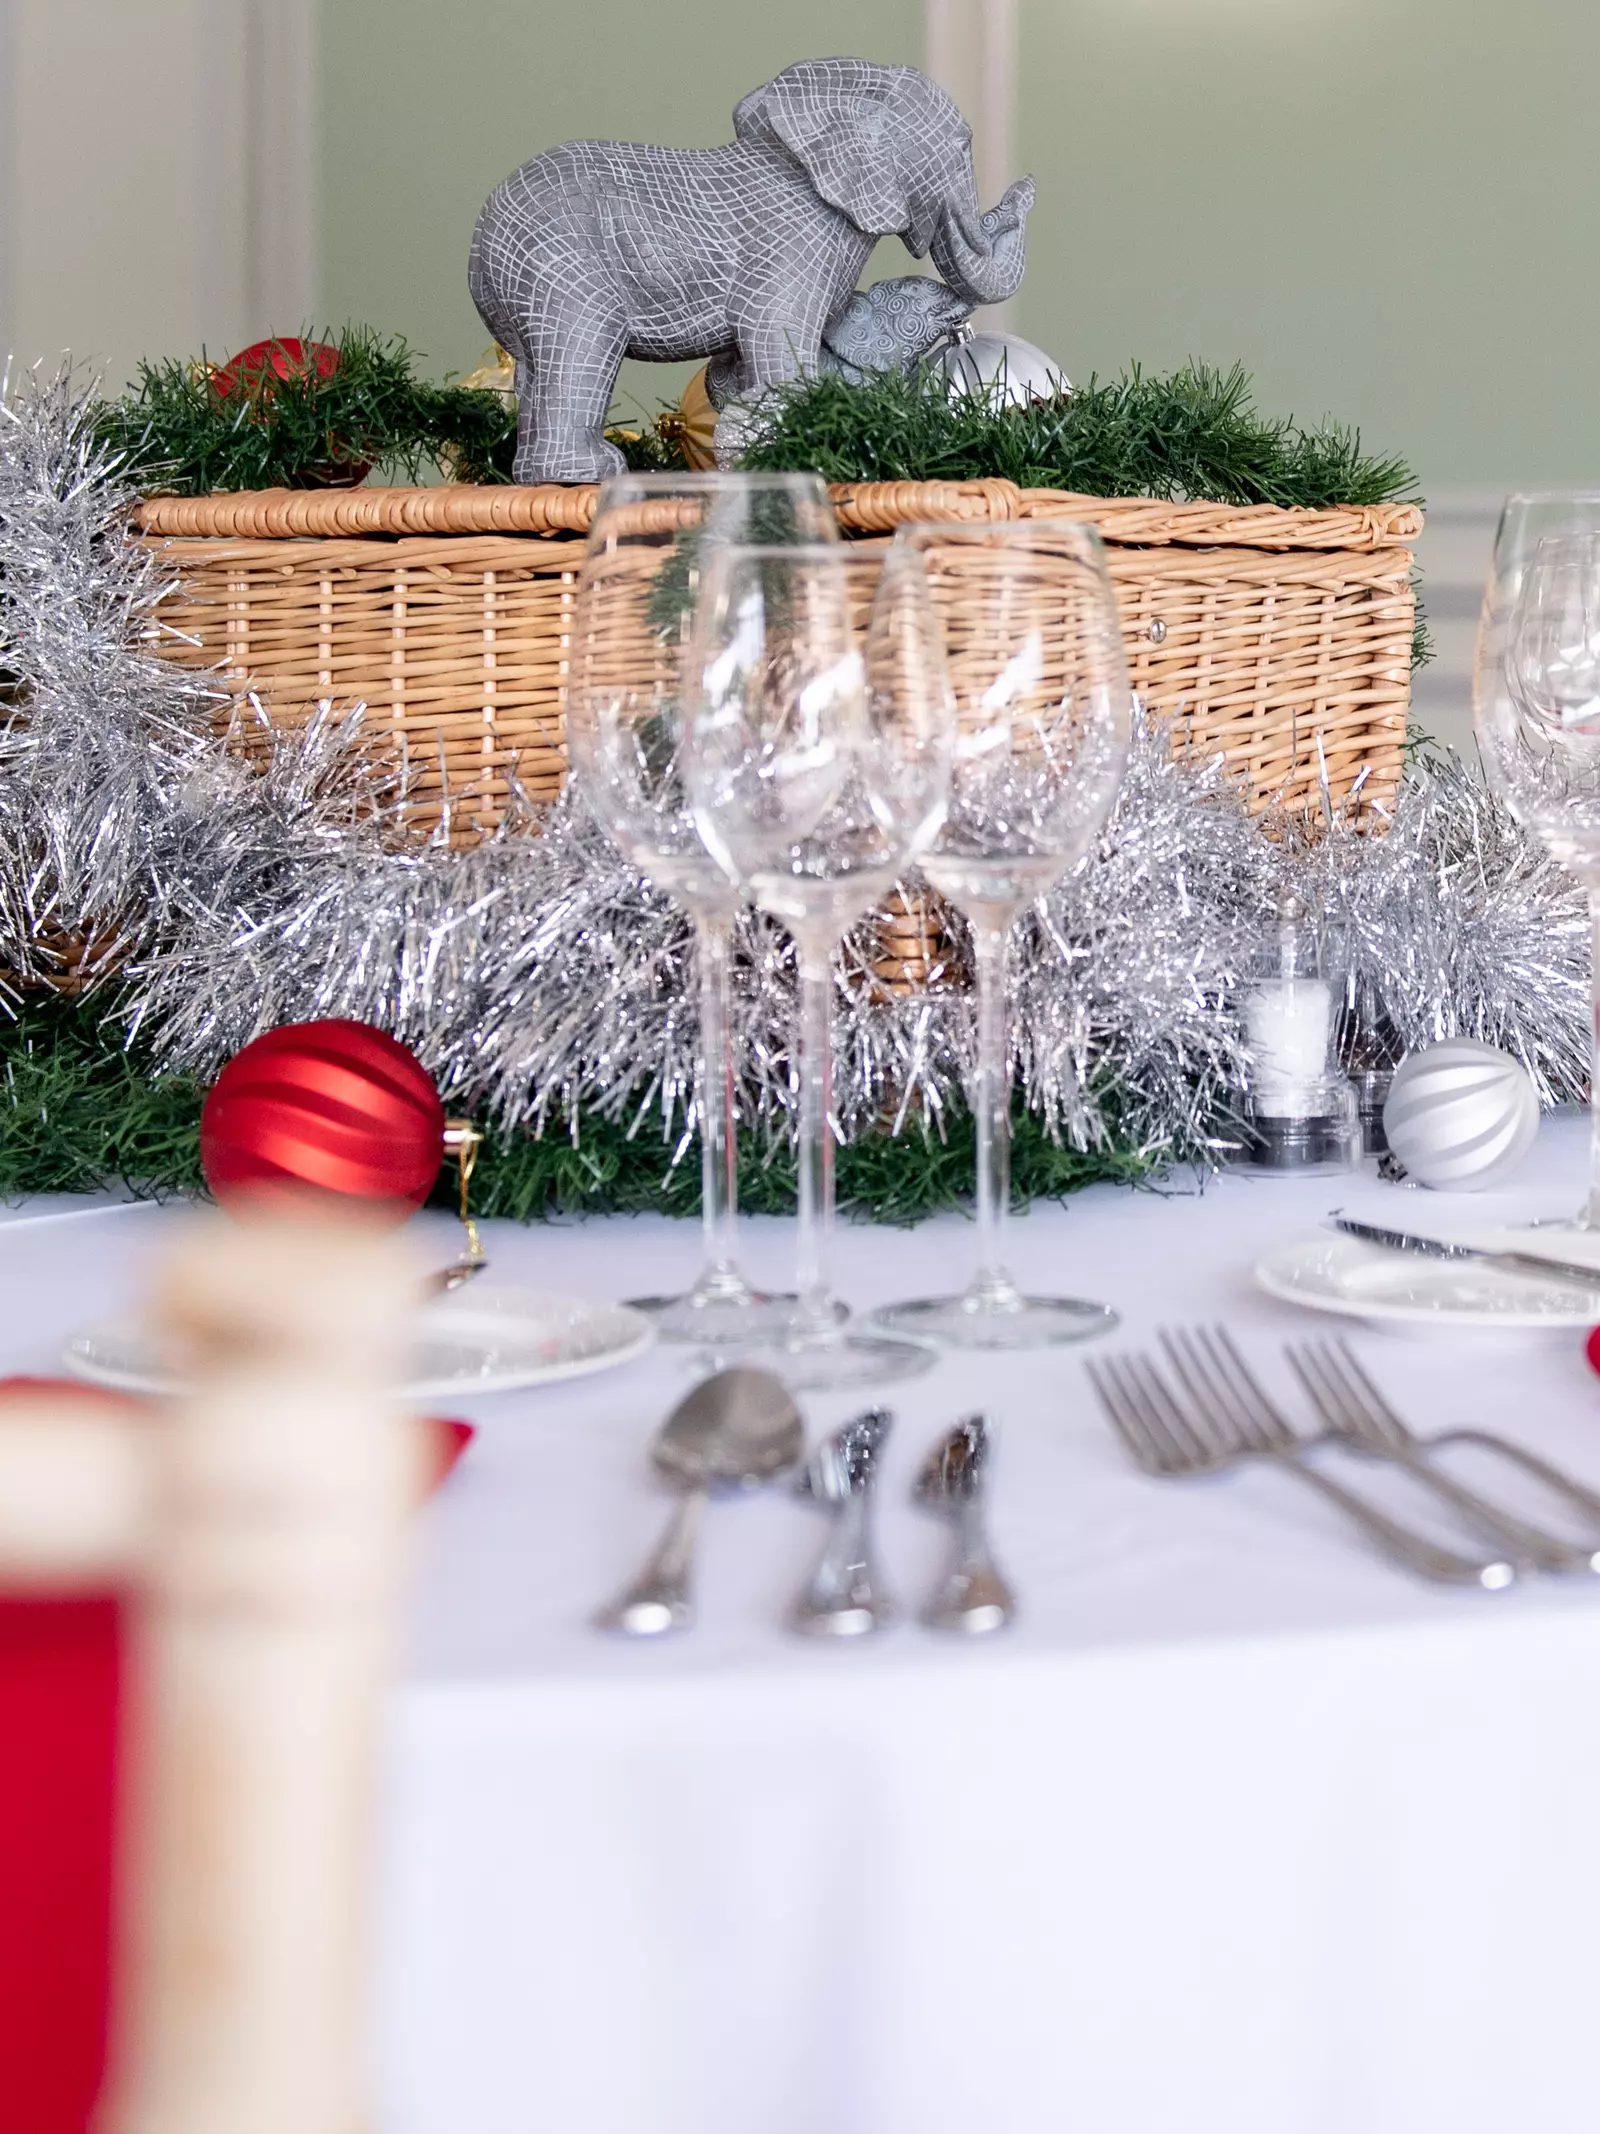 Christmas party table setting including a hamper